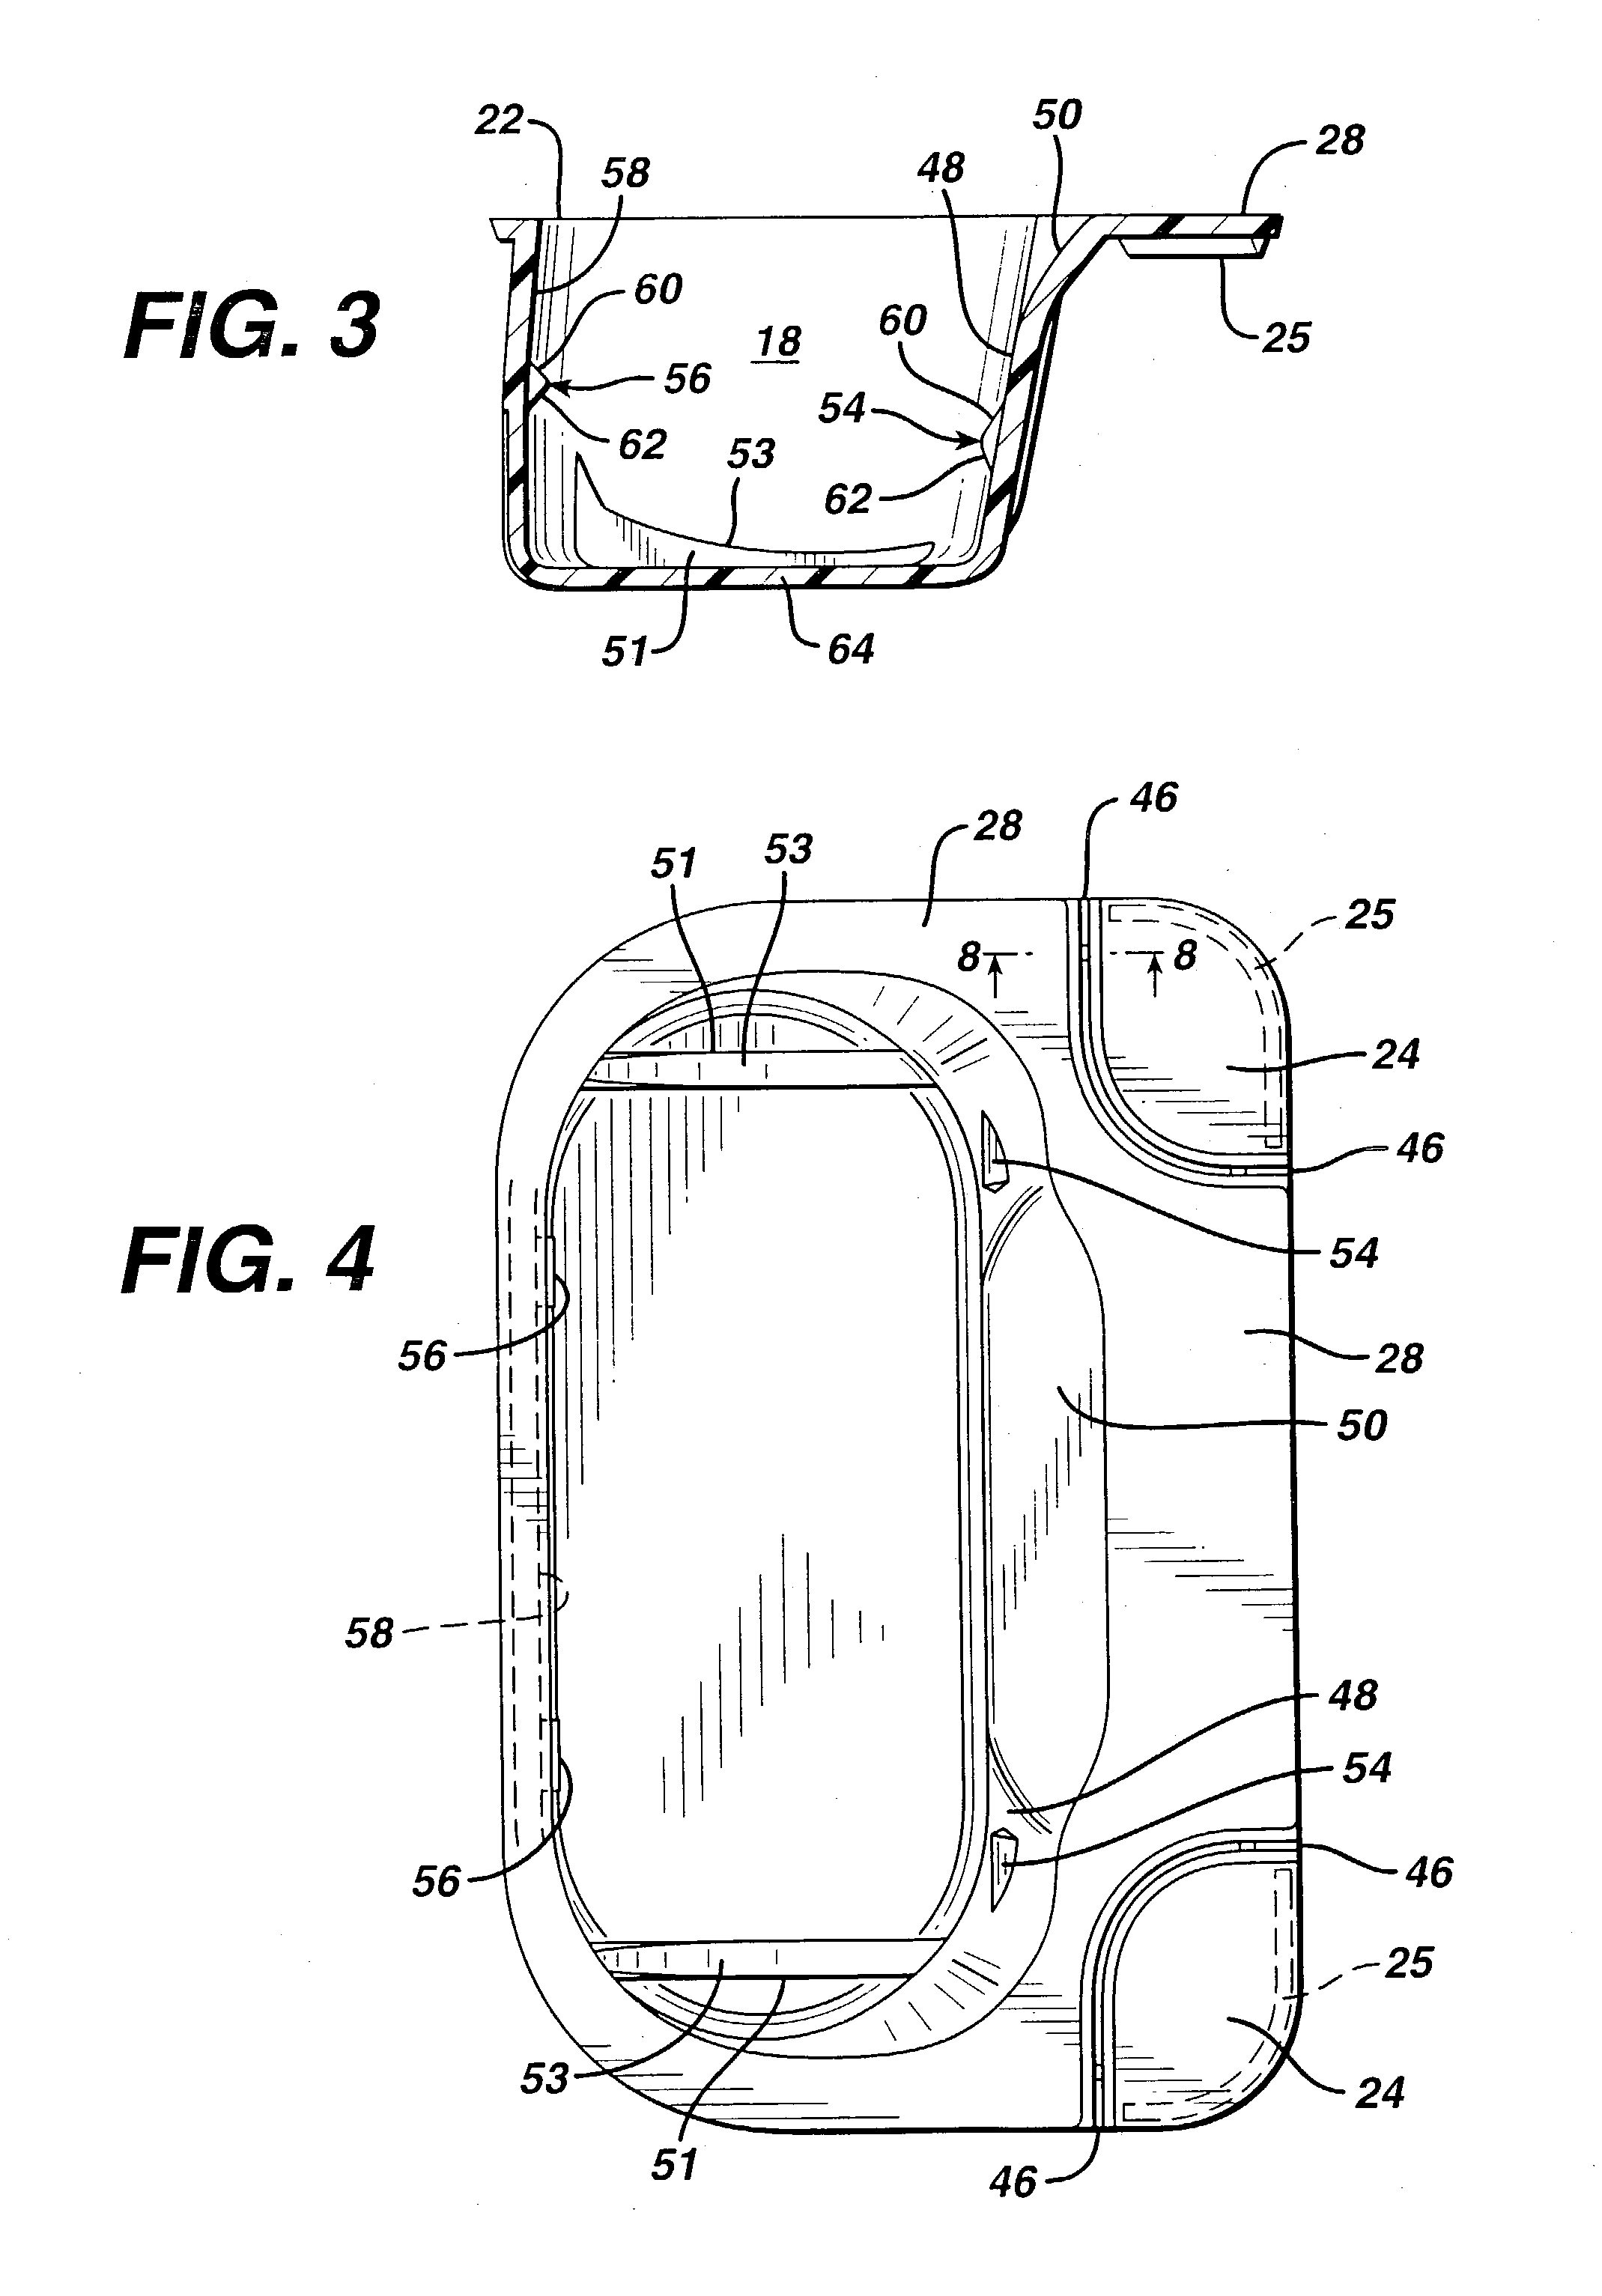 Container for shaving cartridge or other stored item